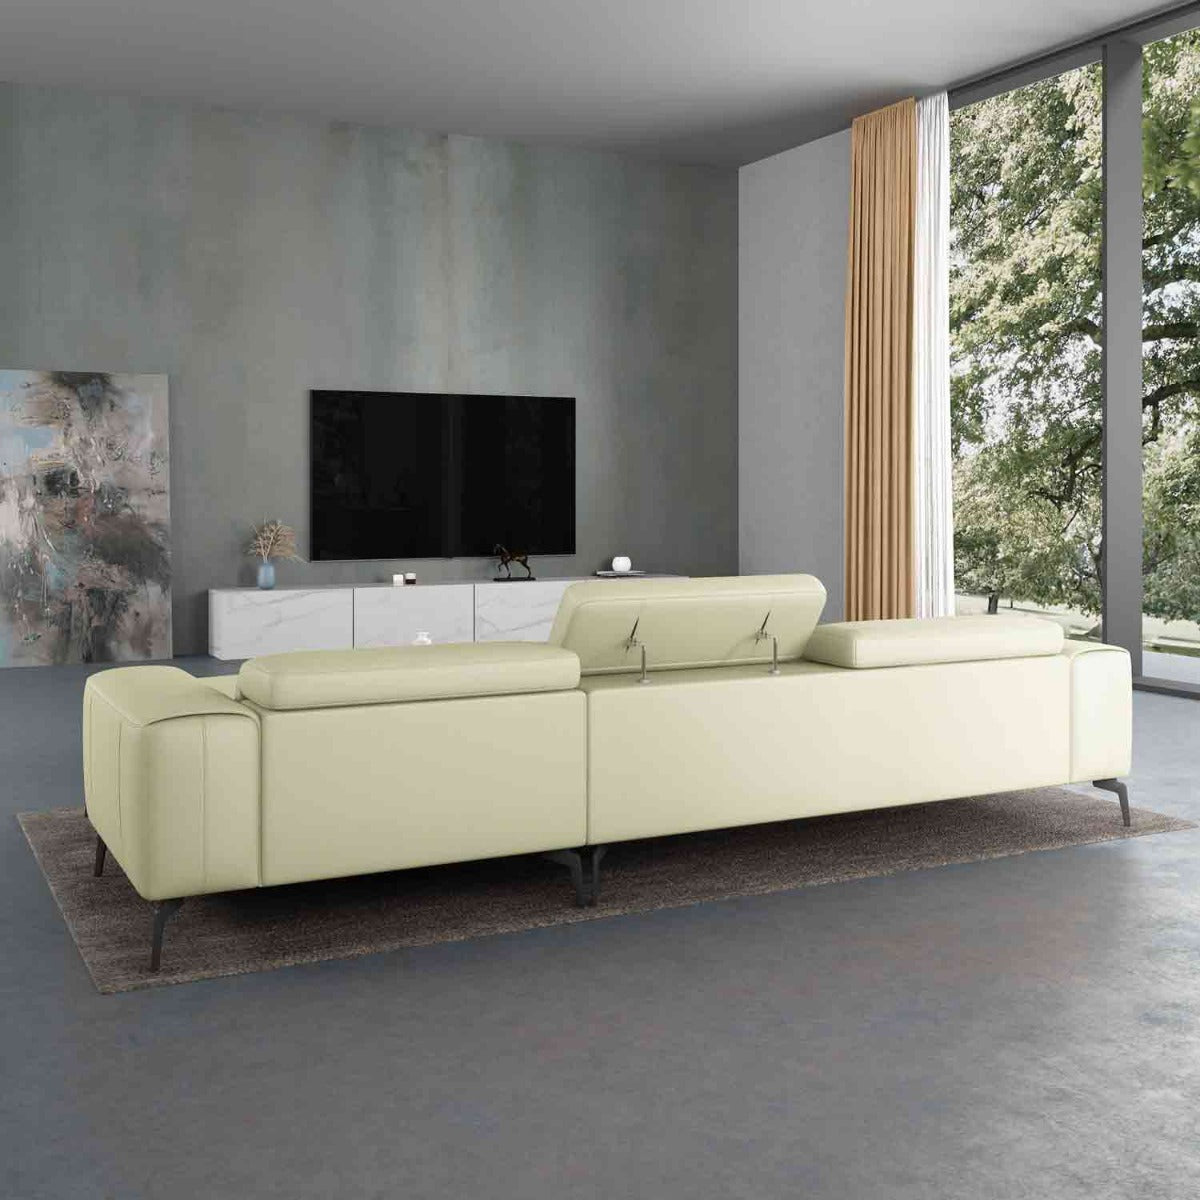 European Furniture - Cavour Right Hand Facing Sectional In off White - 12557R-3RHF - New Star Living